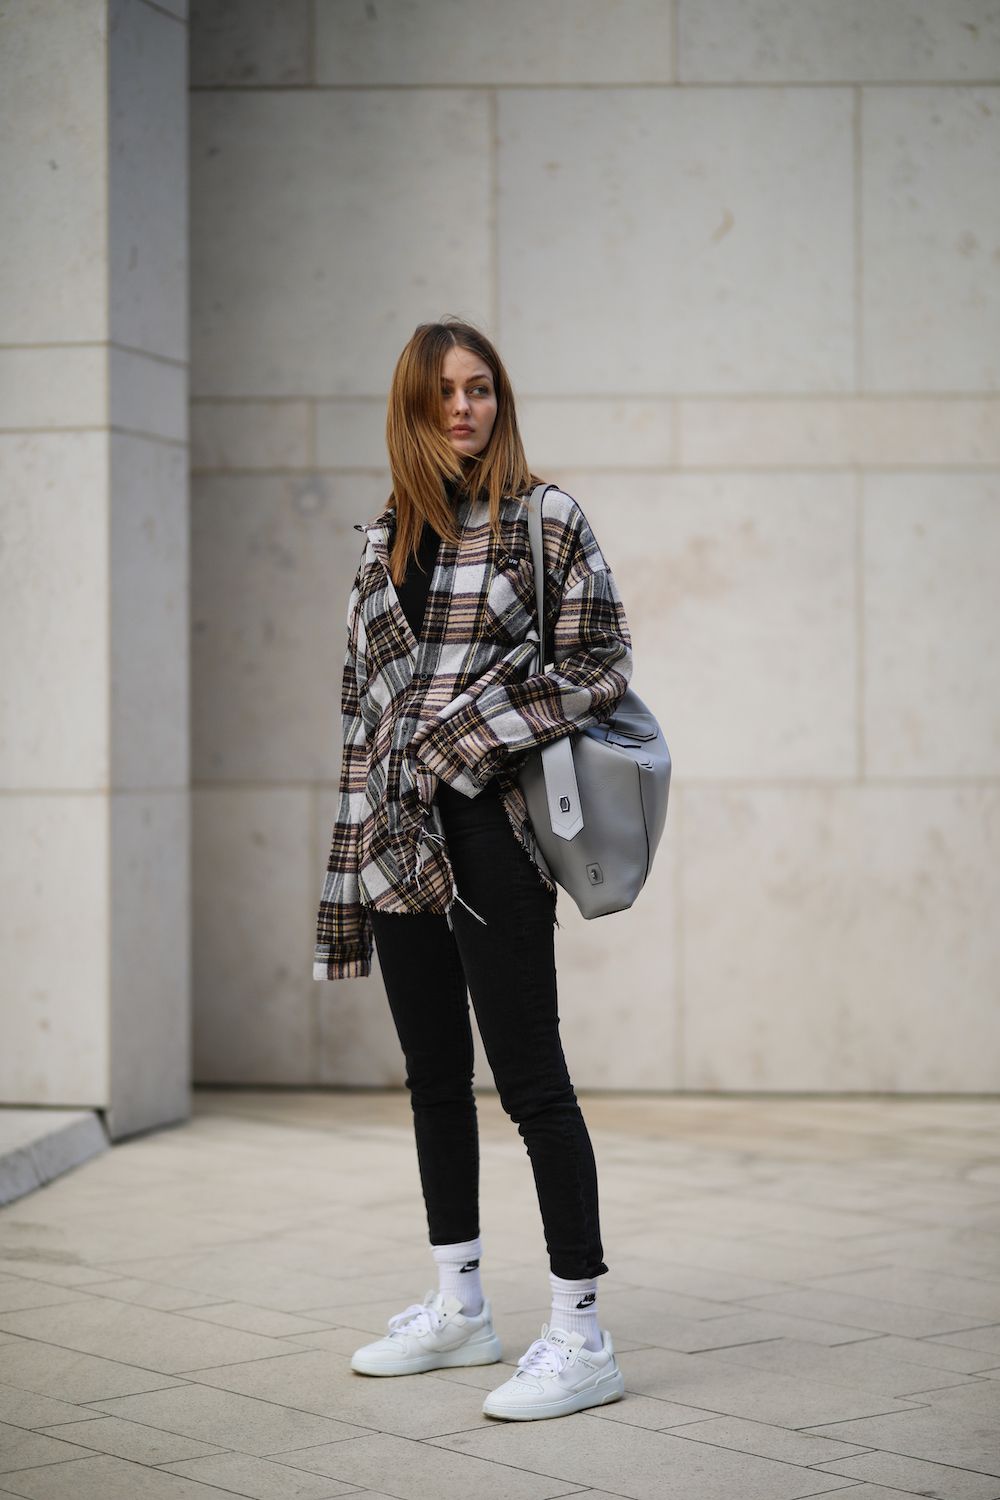 250 Best Flannel and Plaid Shirt Outfits ideas in 2023